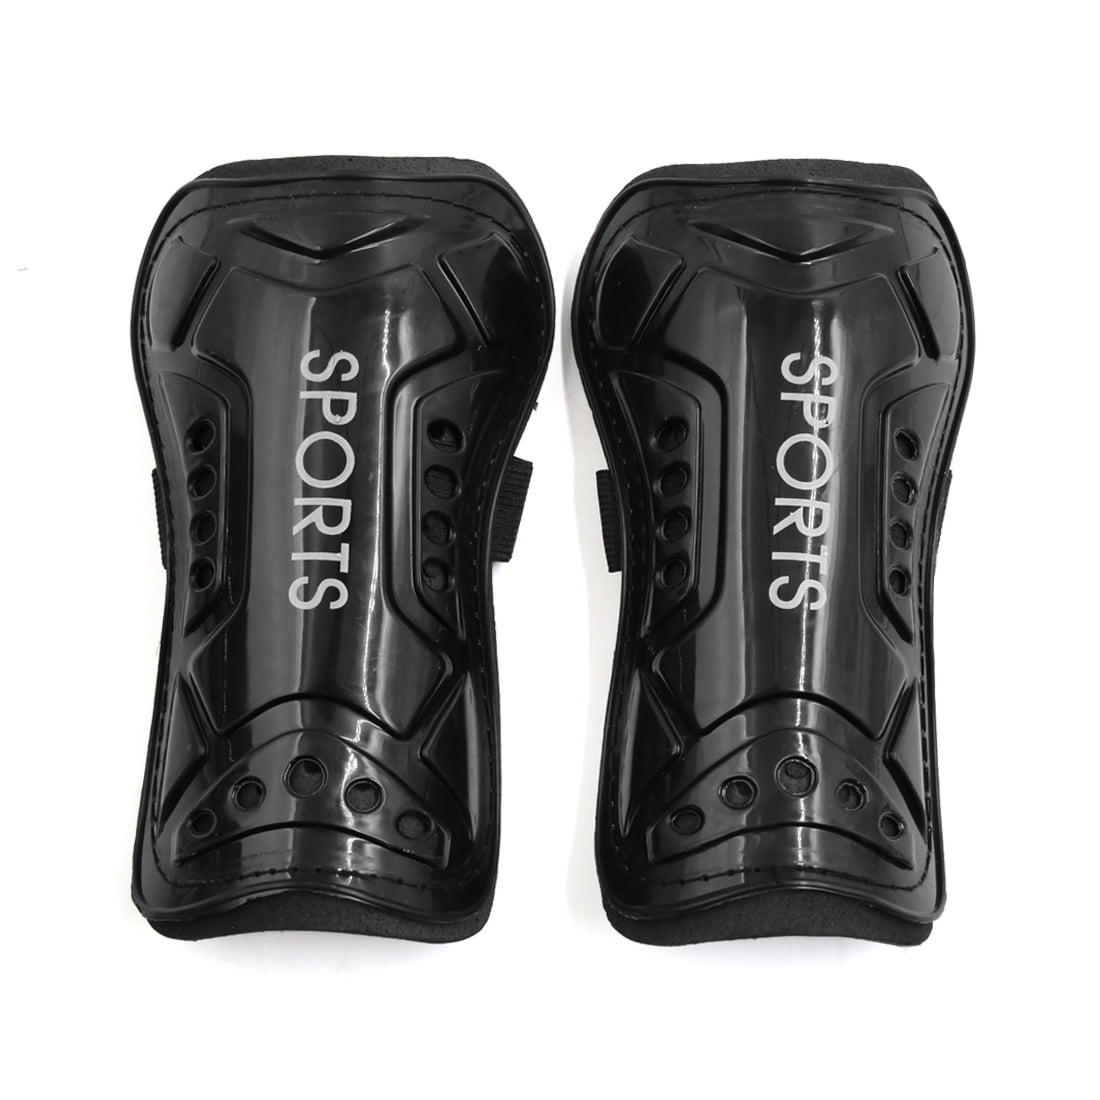 Childrens Football Shin Pads Soccer Guards Supporters Leg Protect Gear Kid Boy 